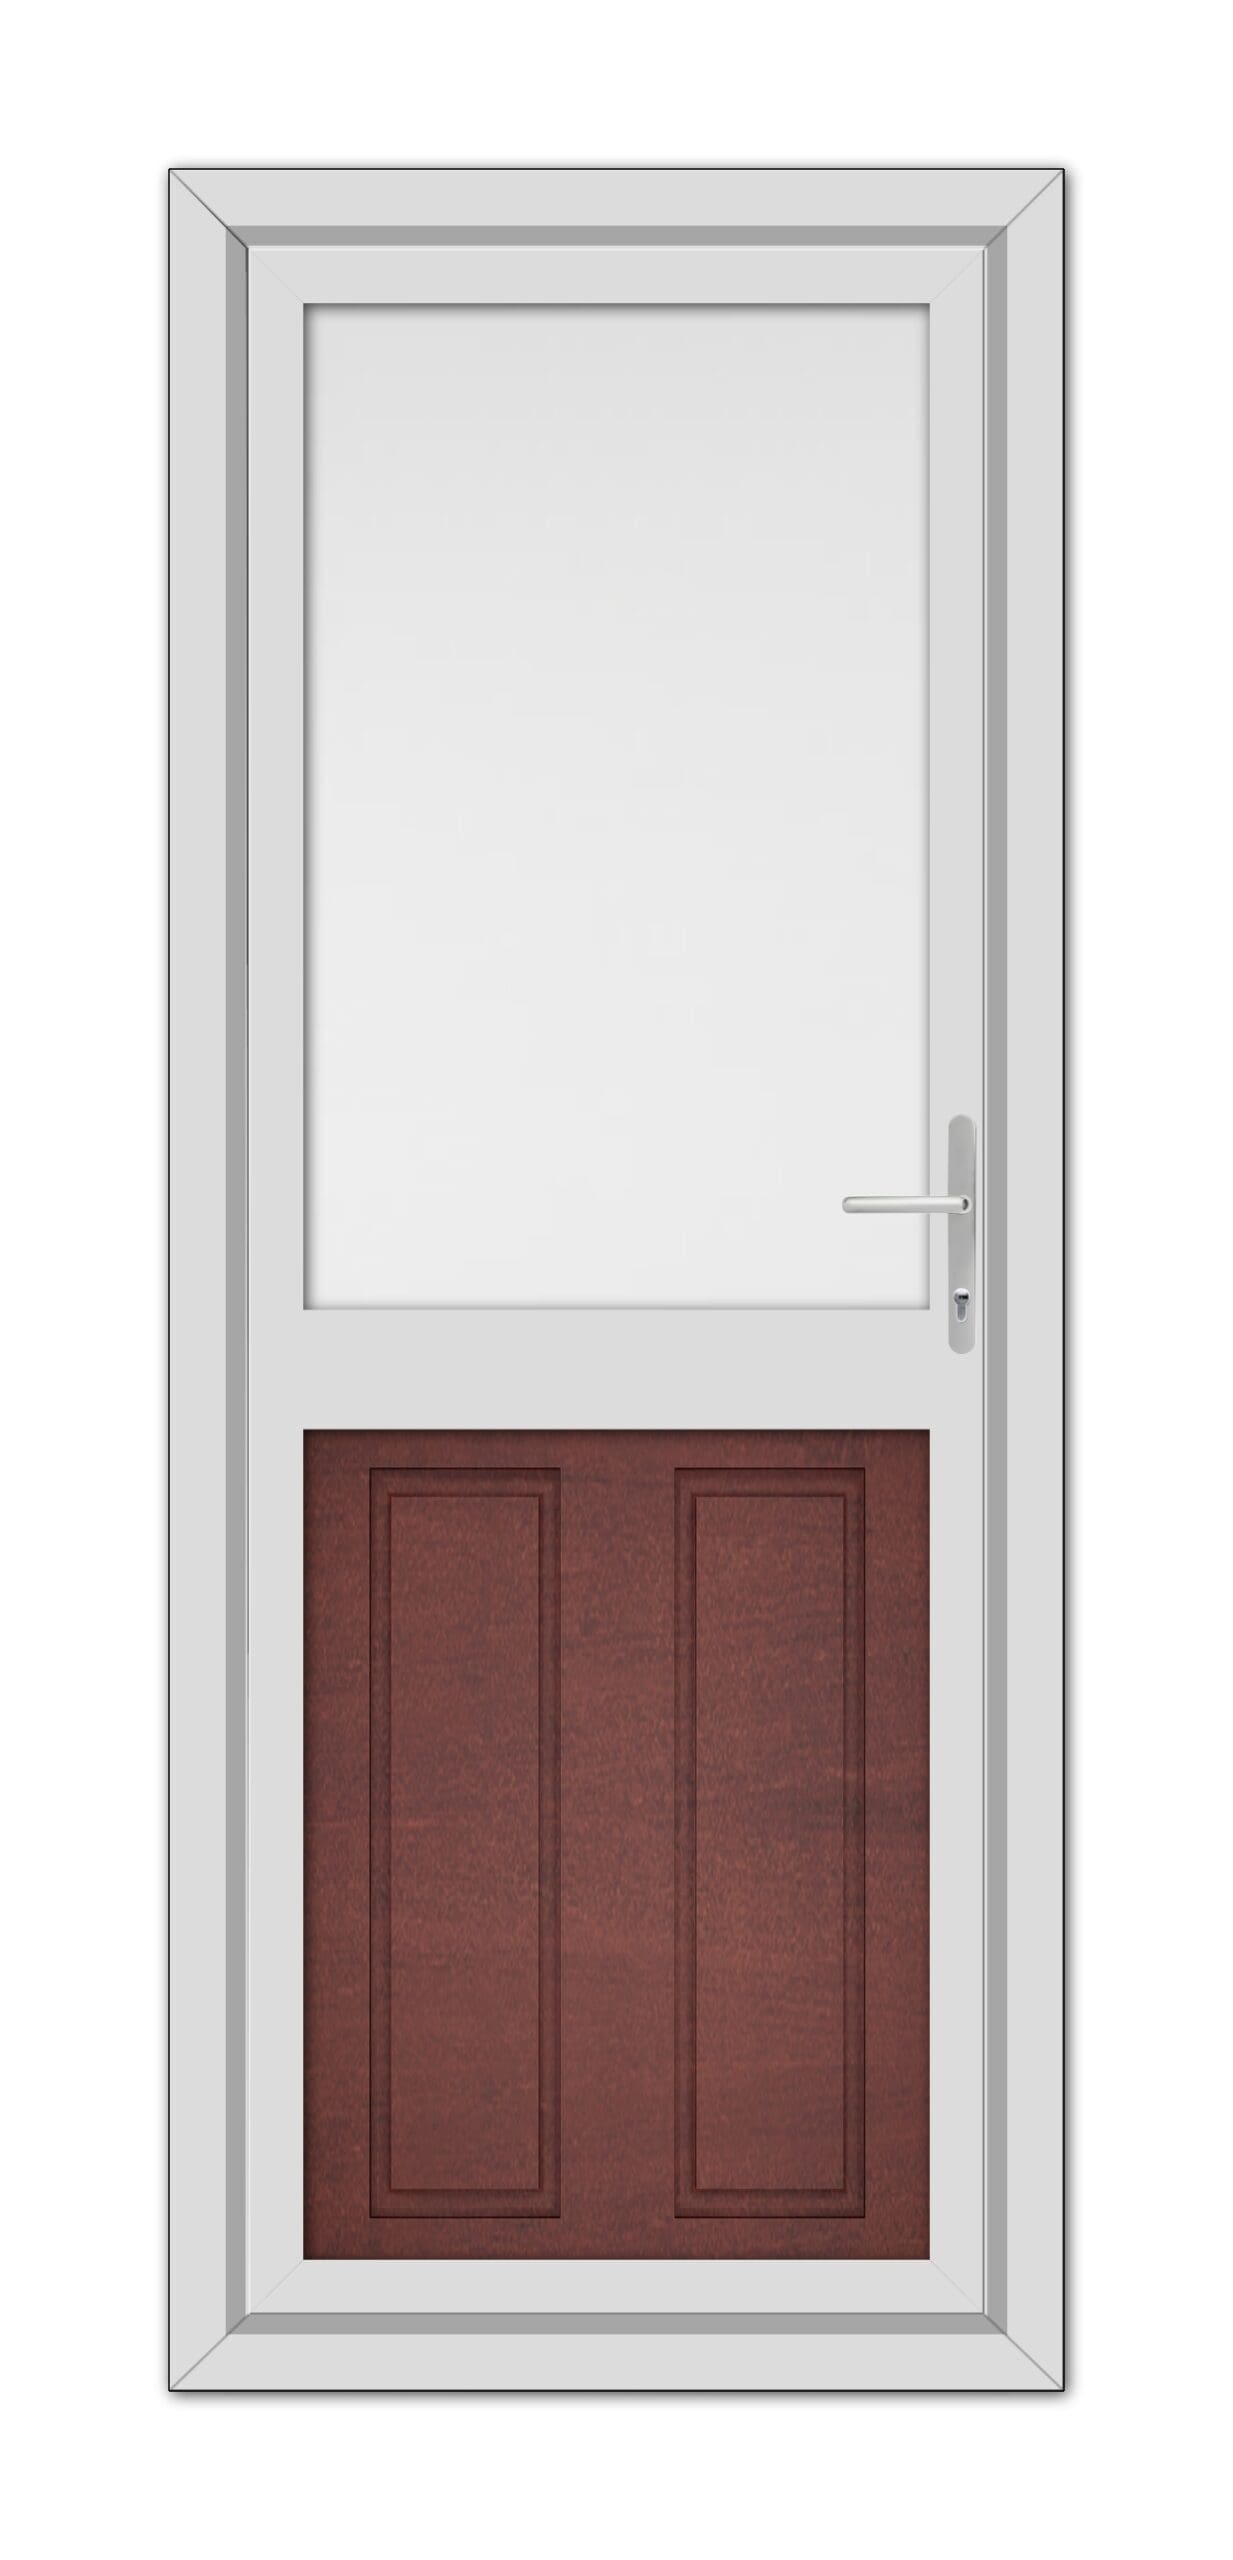 A Mahogan Manor Half uPVC Back Door with a silver handle, featuring a small upper window and two lower dark wood panels, set against a white background.